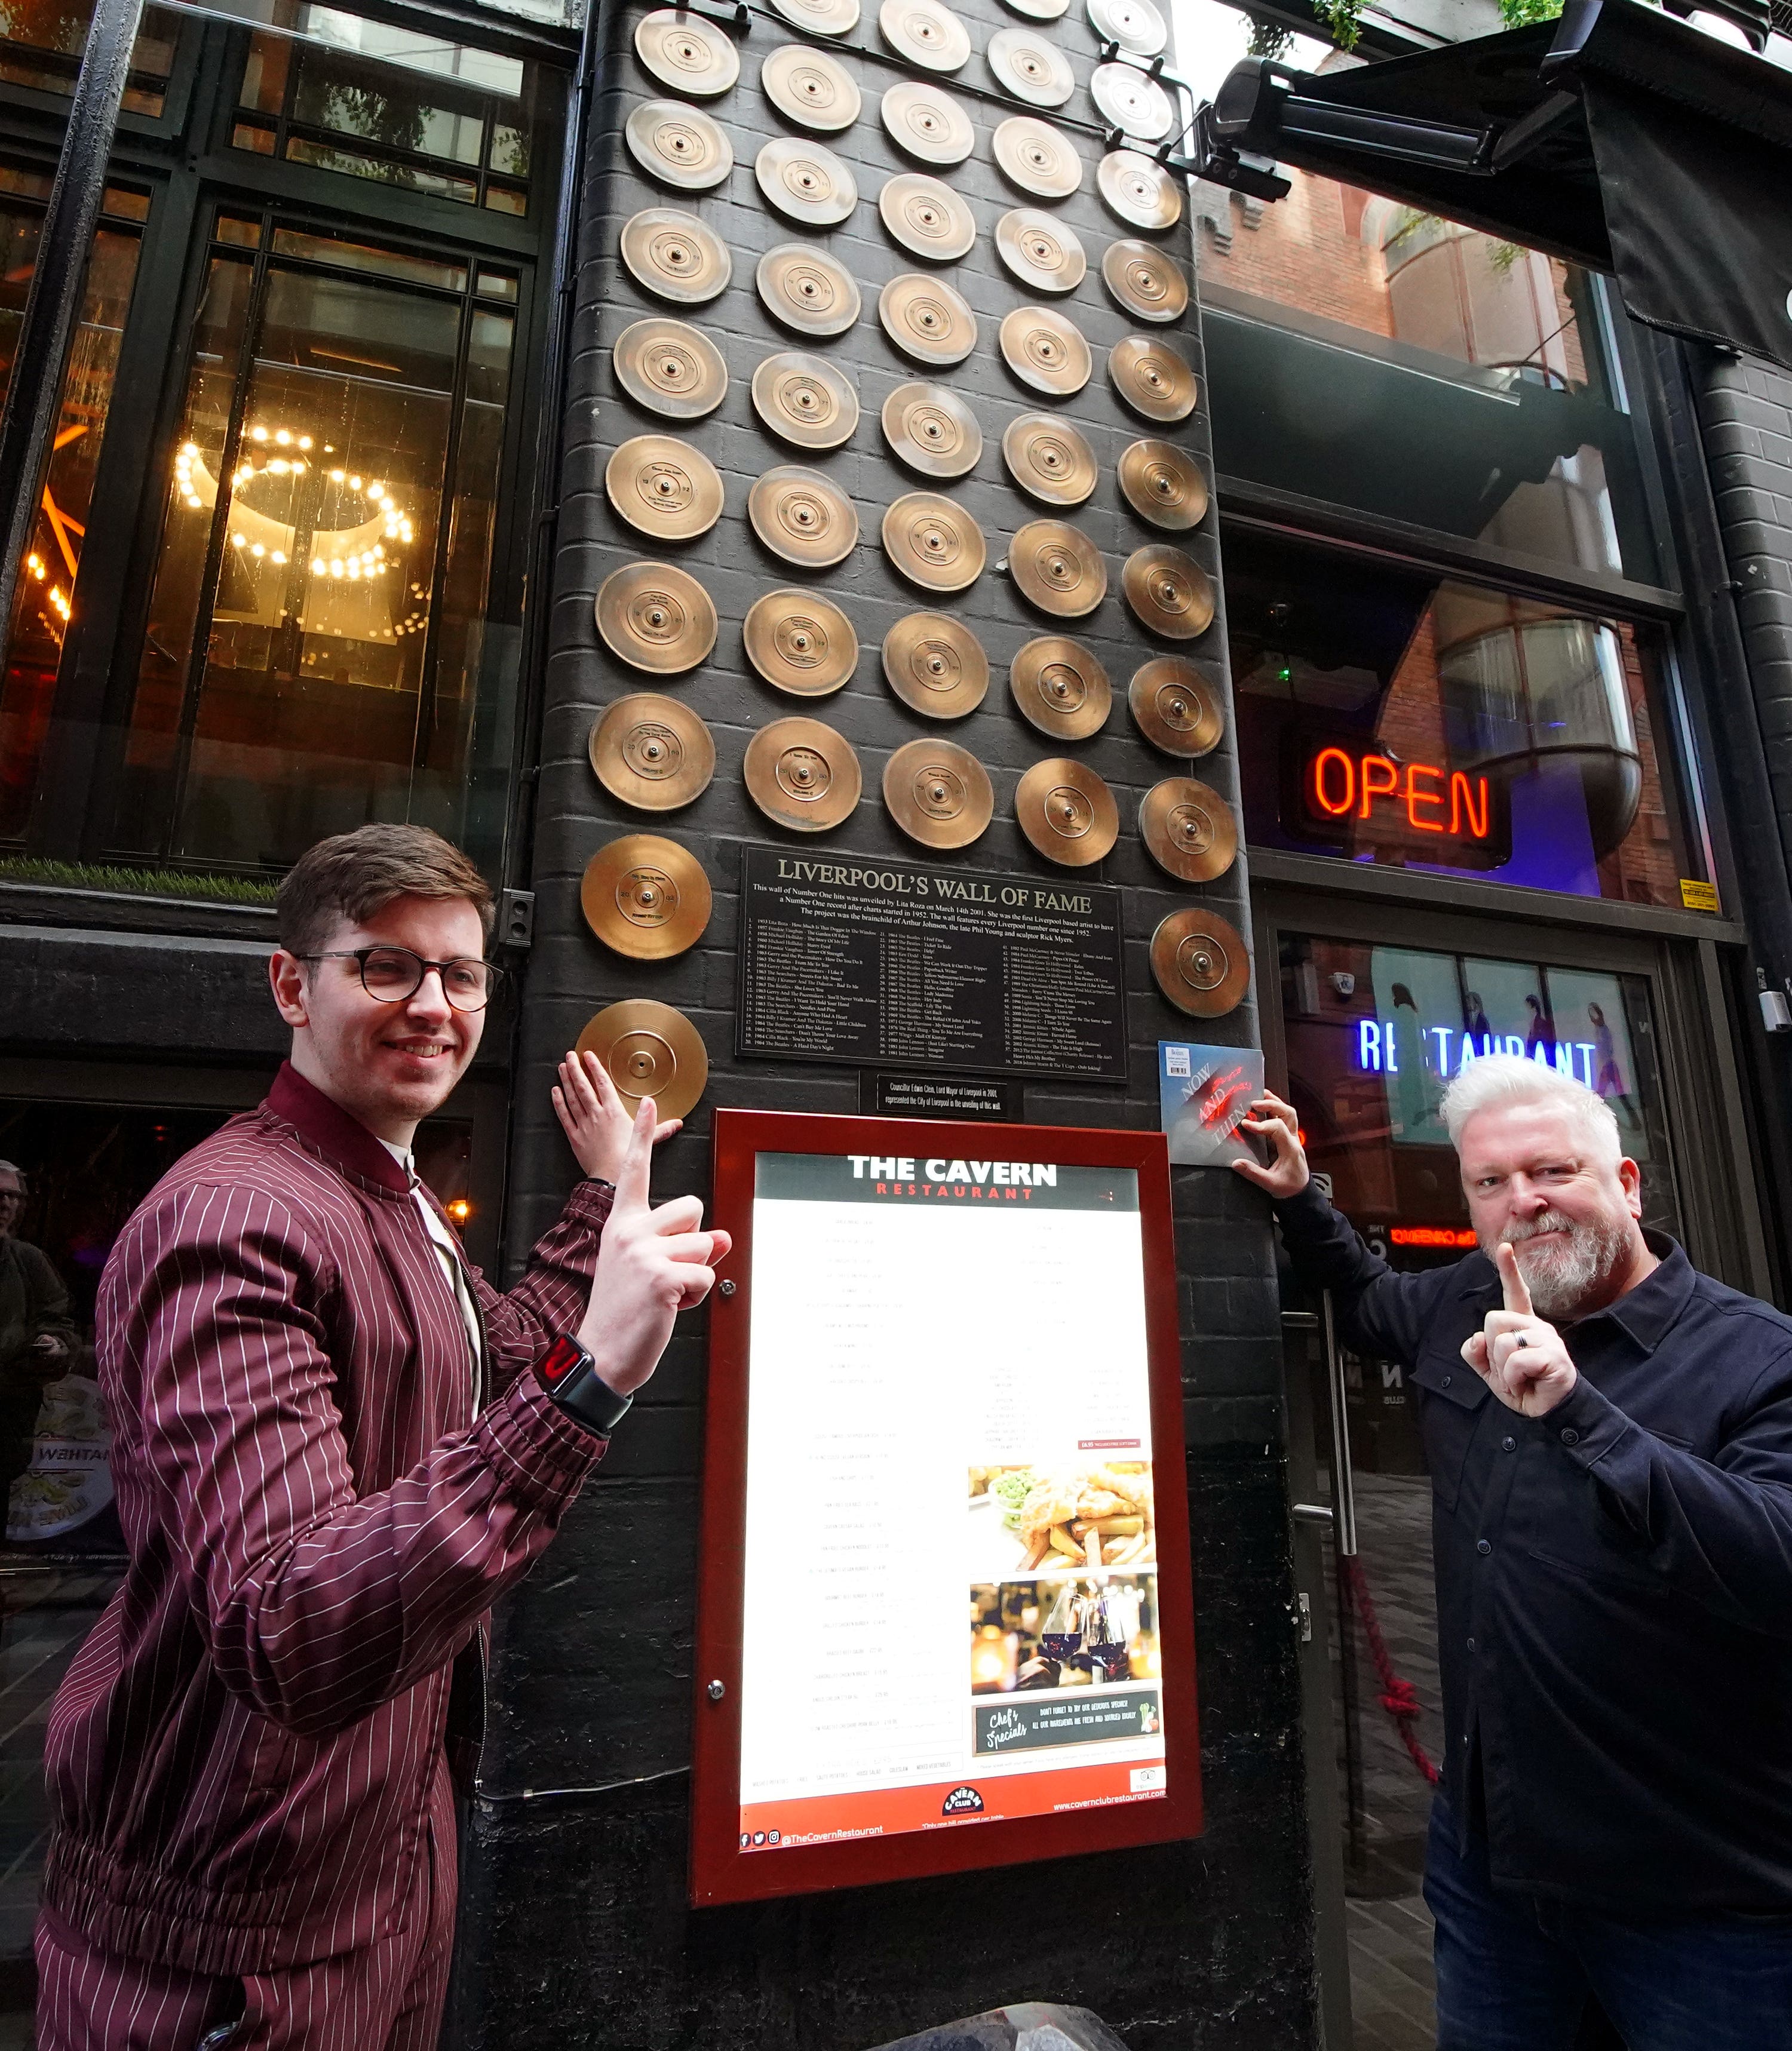 Liverpool’s cabinet member for culture, Cllr Harry Doyle (left) with Jon Keats, director of The Cavern, at Liverpool’s Pop Music Wall of Fame for the announcement that the new Beatles single, Now And Then, is to be immortalised on the wall.